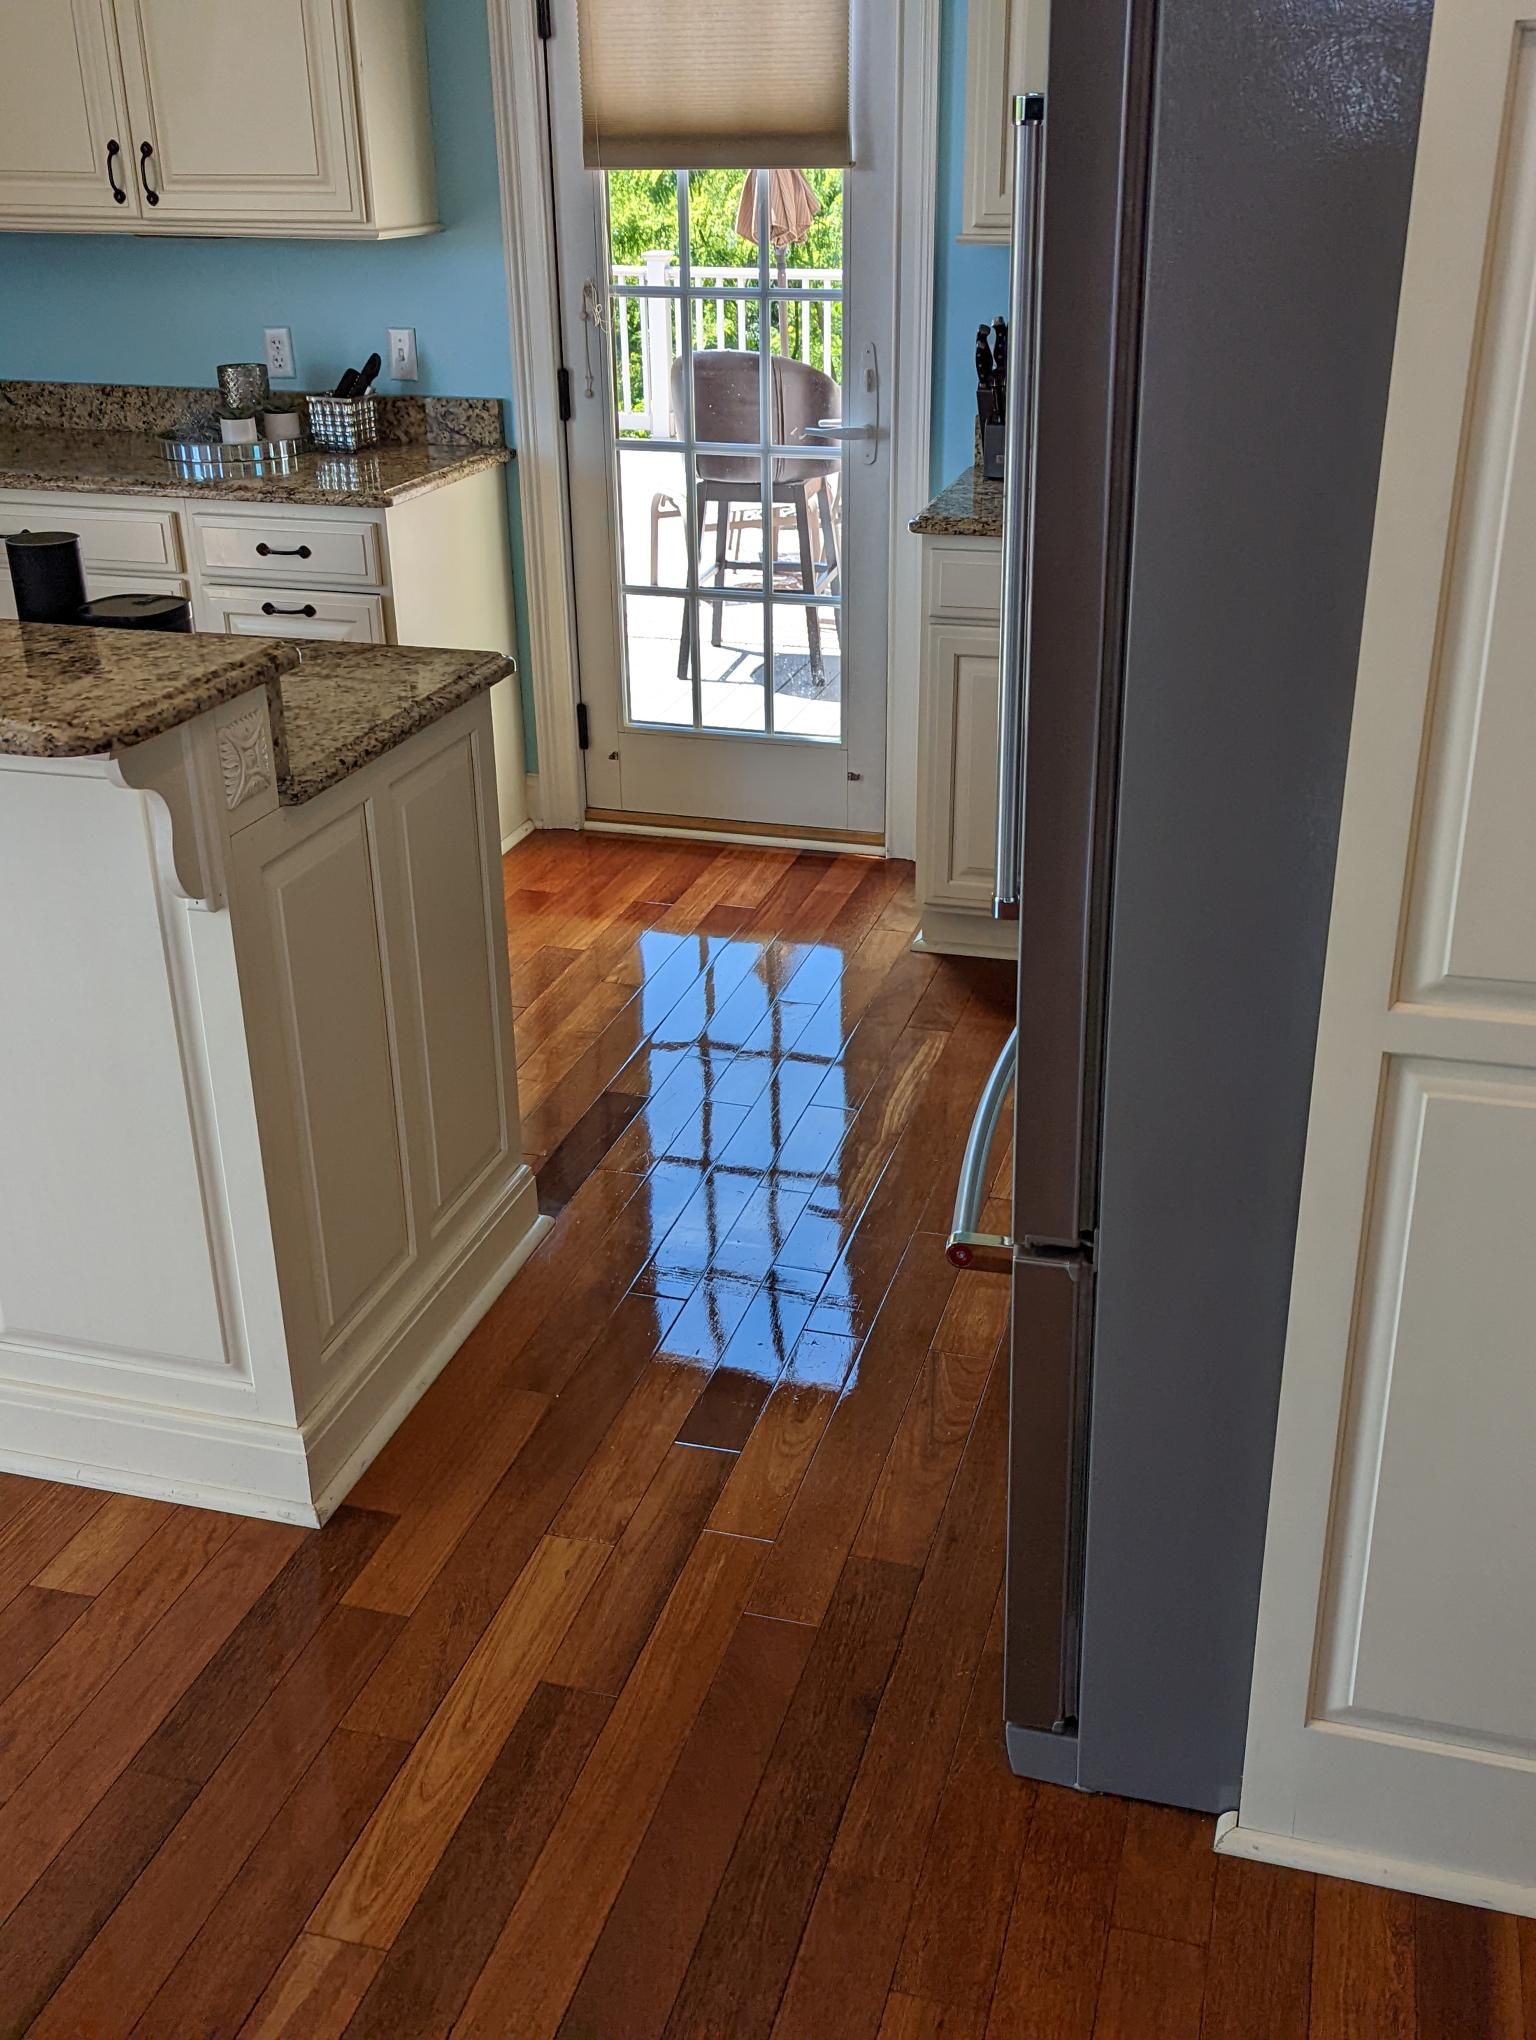 Shiny clean hardwood floor in a kitchen after its been cleaned, mopped, and sealed by a Zerorez Professional